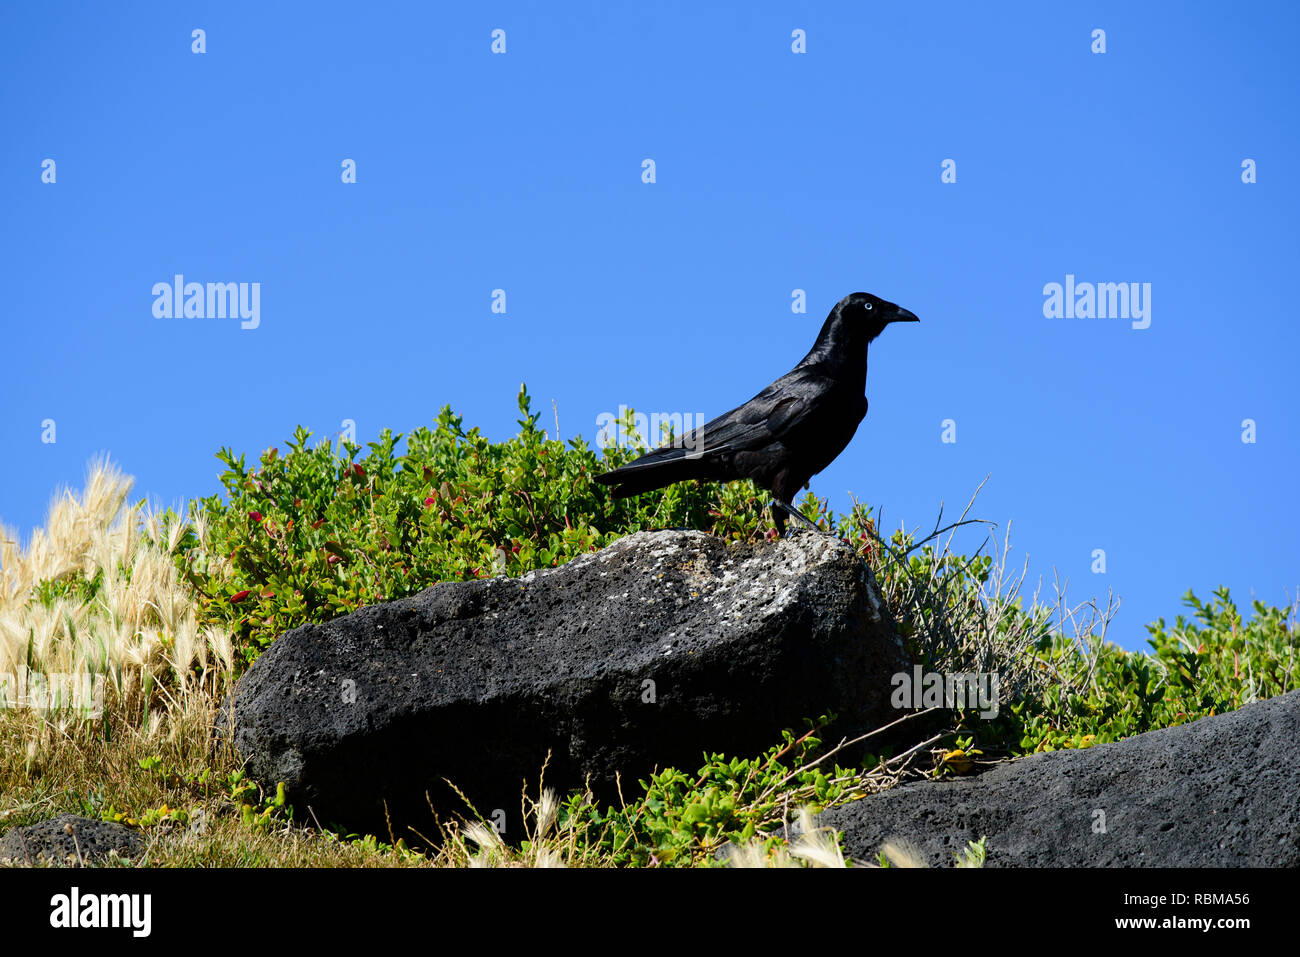 Australian bird, black crow perched on rock ready for take off with blue sky background, Victoria Australia Stock Photo